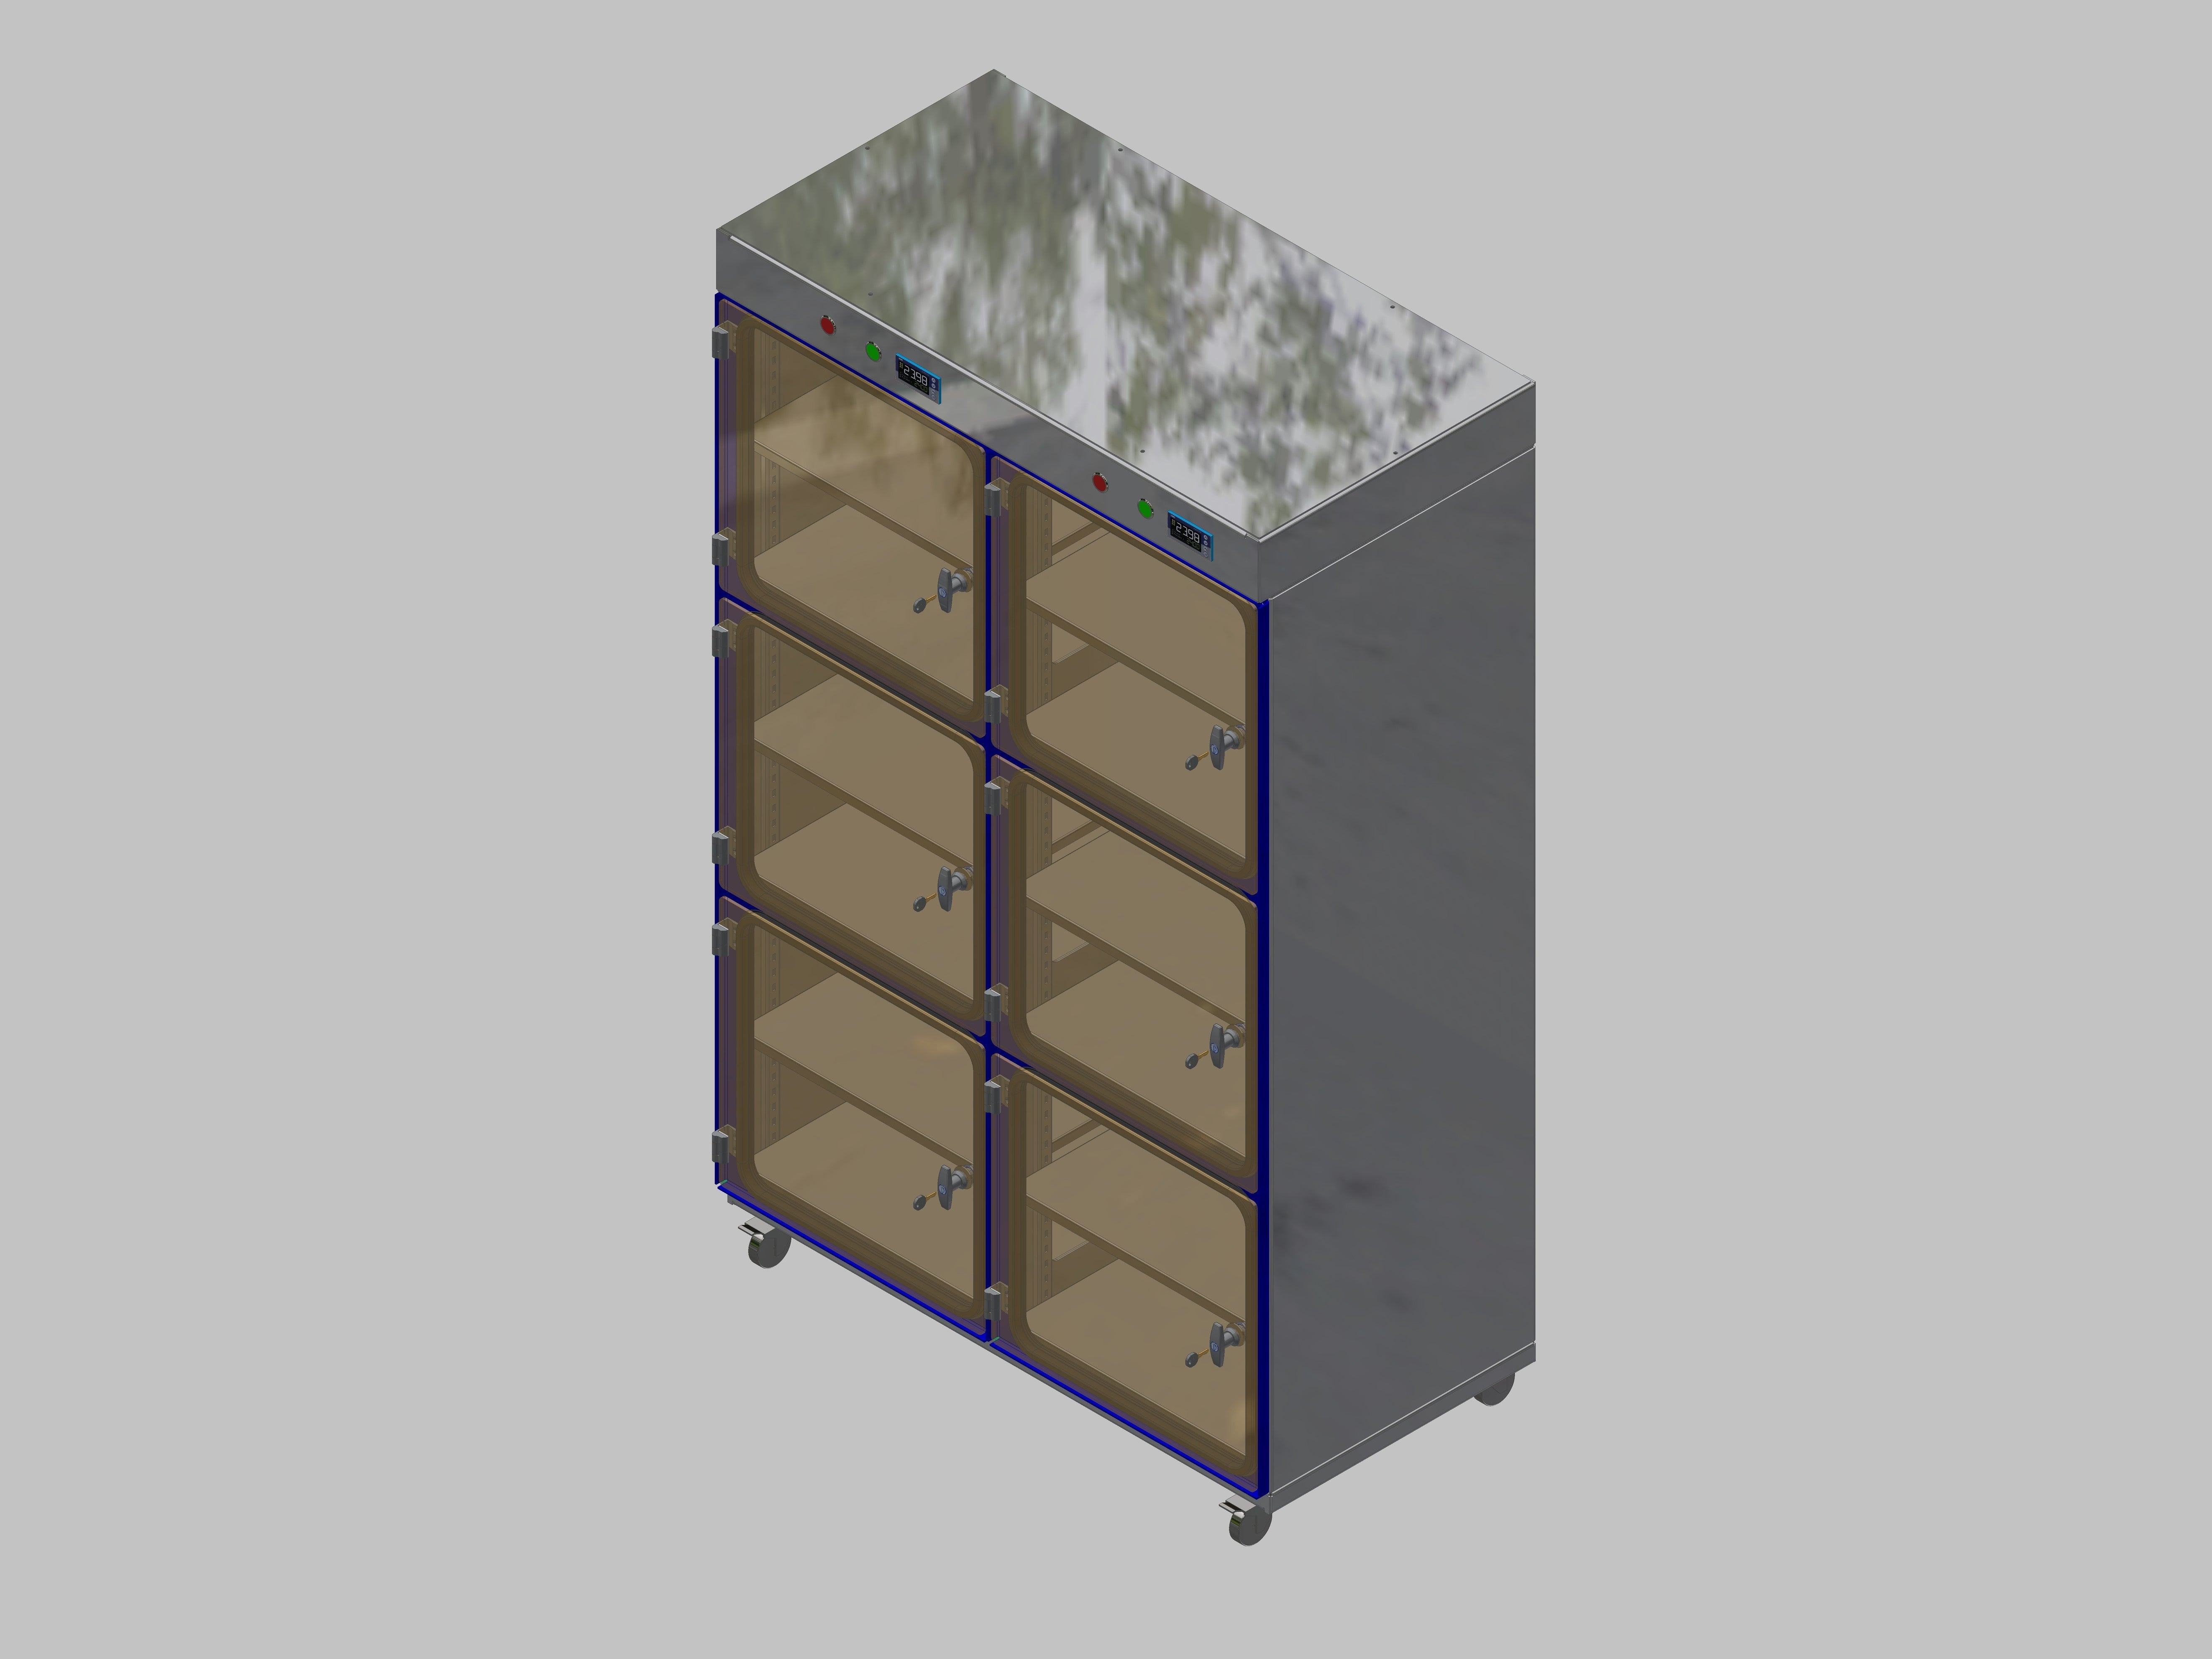 Dry storage cabinet-ITN-1200-6 with 2 shelves per compartment and base design with wheels